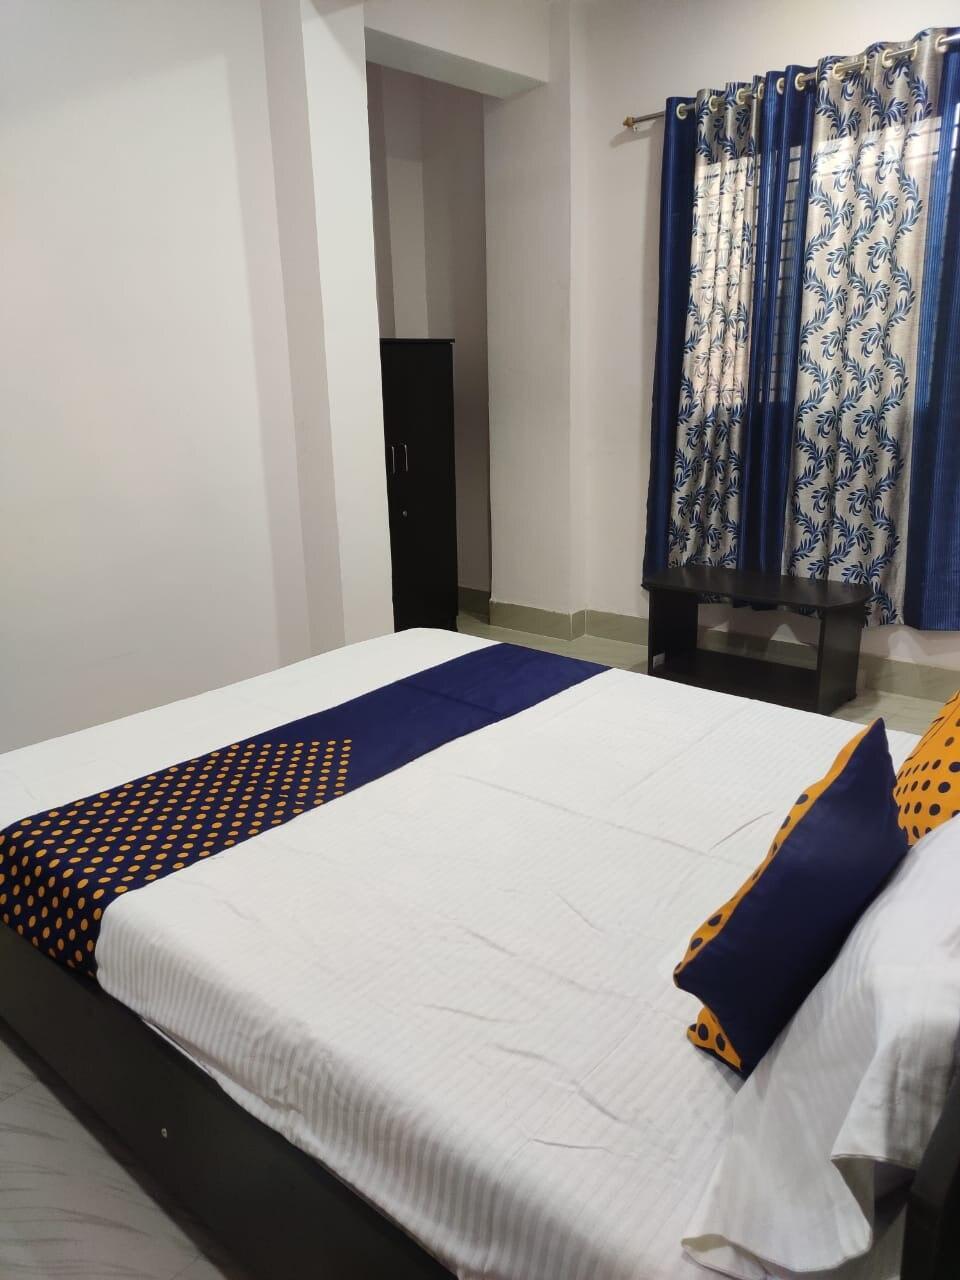 Peaceful And Comfortable Stay At Raison Hotel - Jharkhand